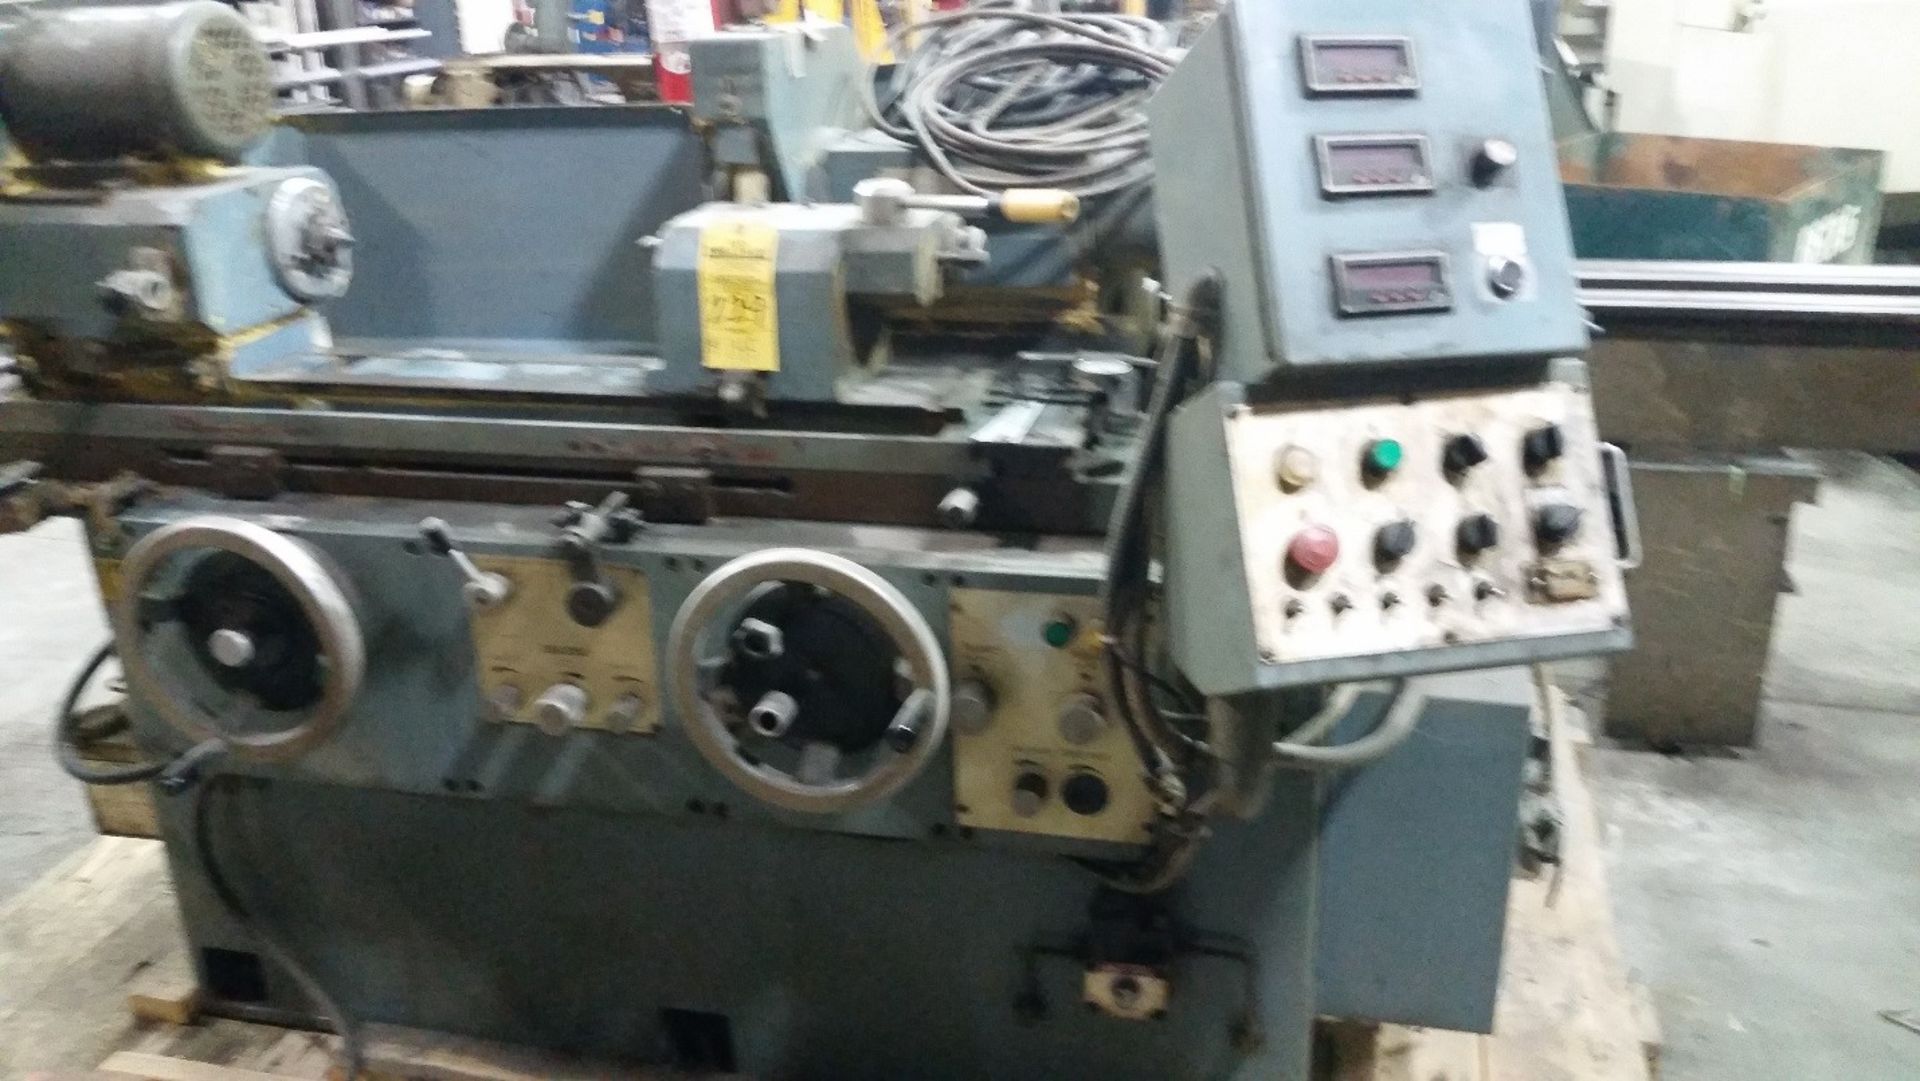 5" X 25" APPROX. CYLINDRICAL GRINDER; DRO, PB CONTROL - LOCATED IN PALMYRA, NY